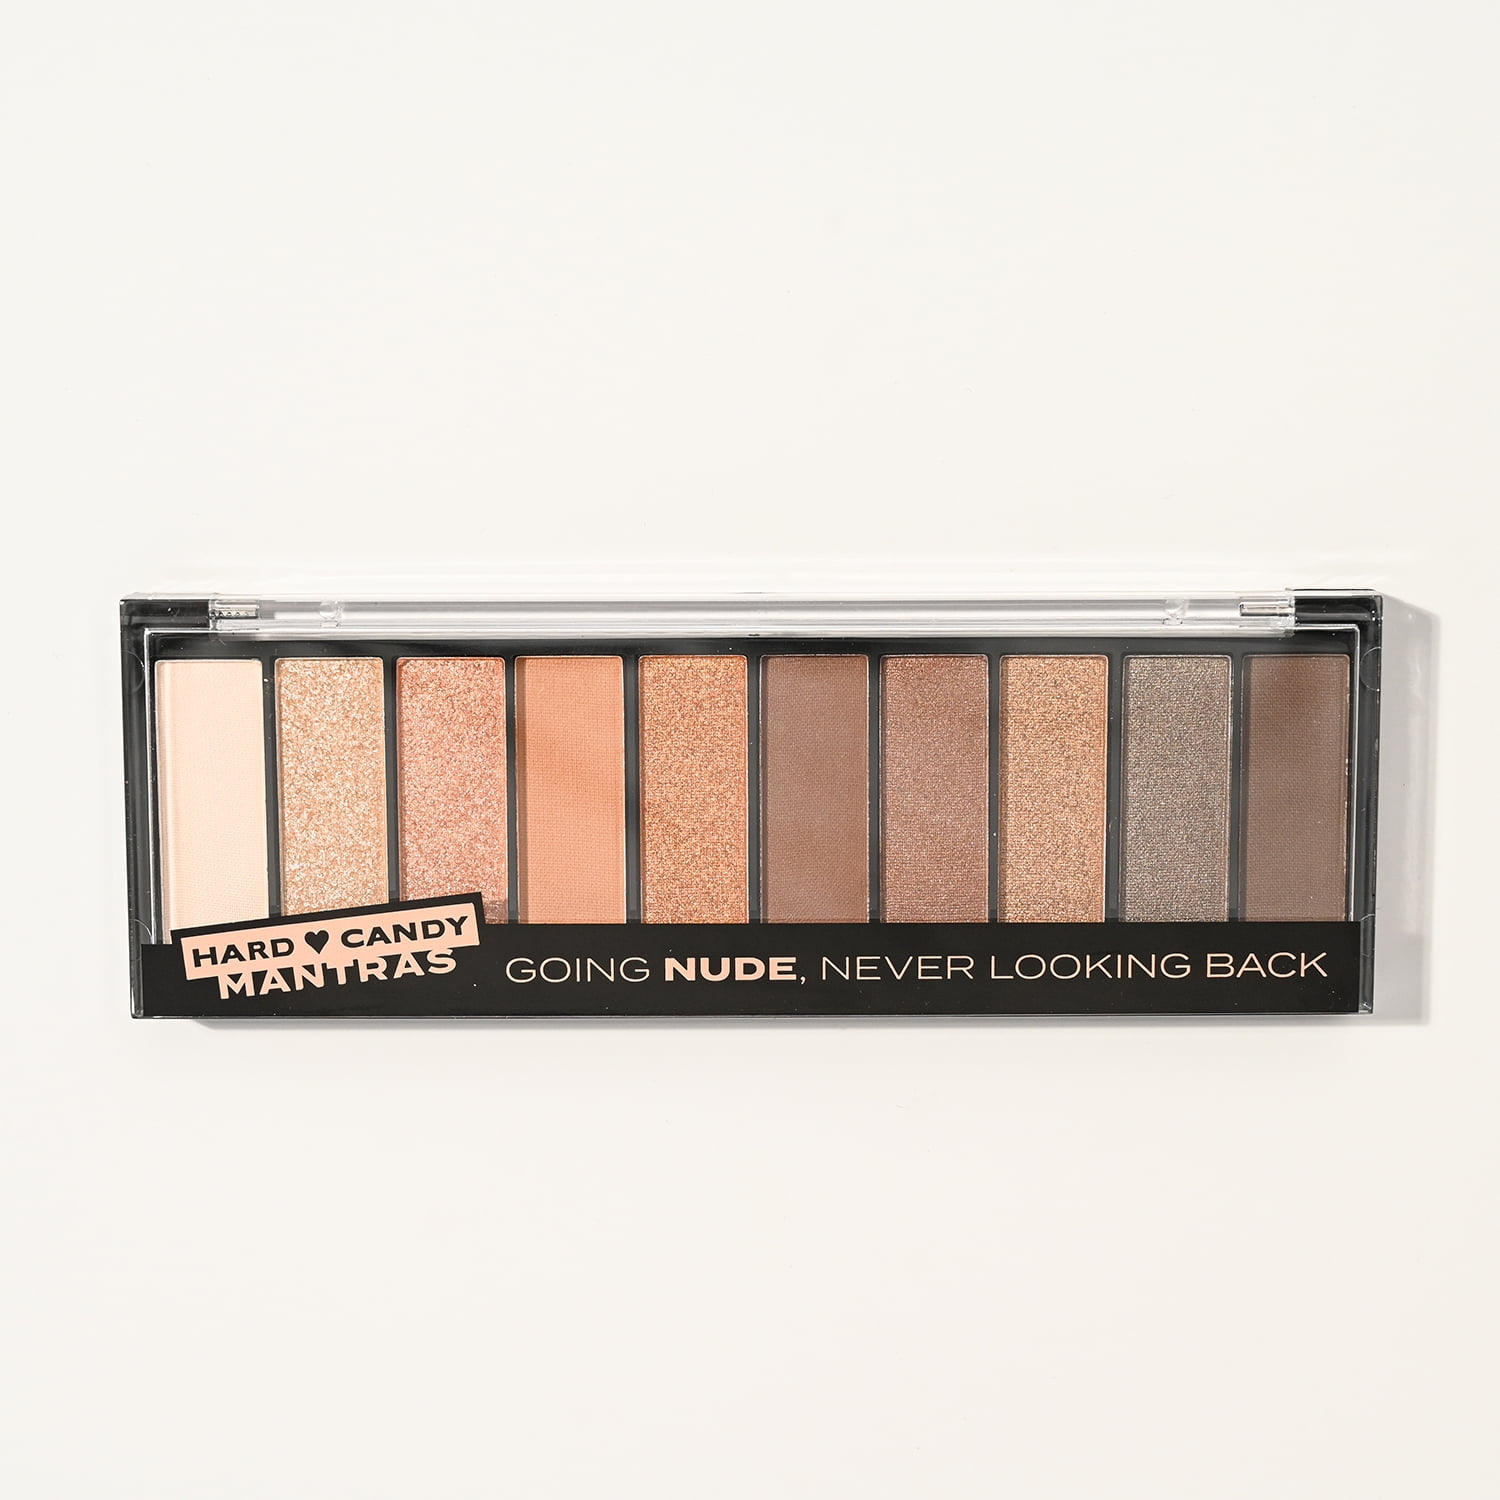 Hard Candy, Mantra Eyeshadow Palette, 10 Long-Lasting Shades, Going Nude,  0.4 oz